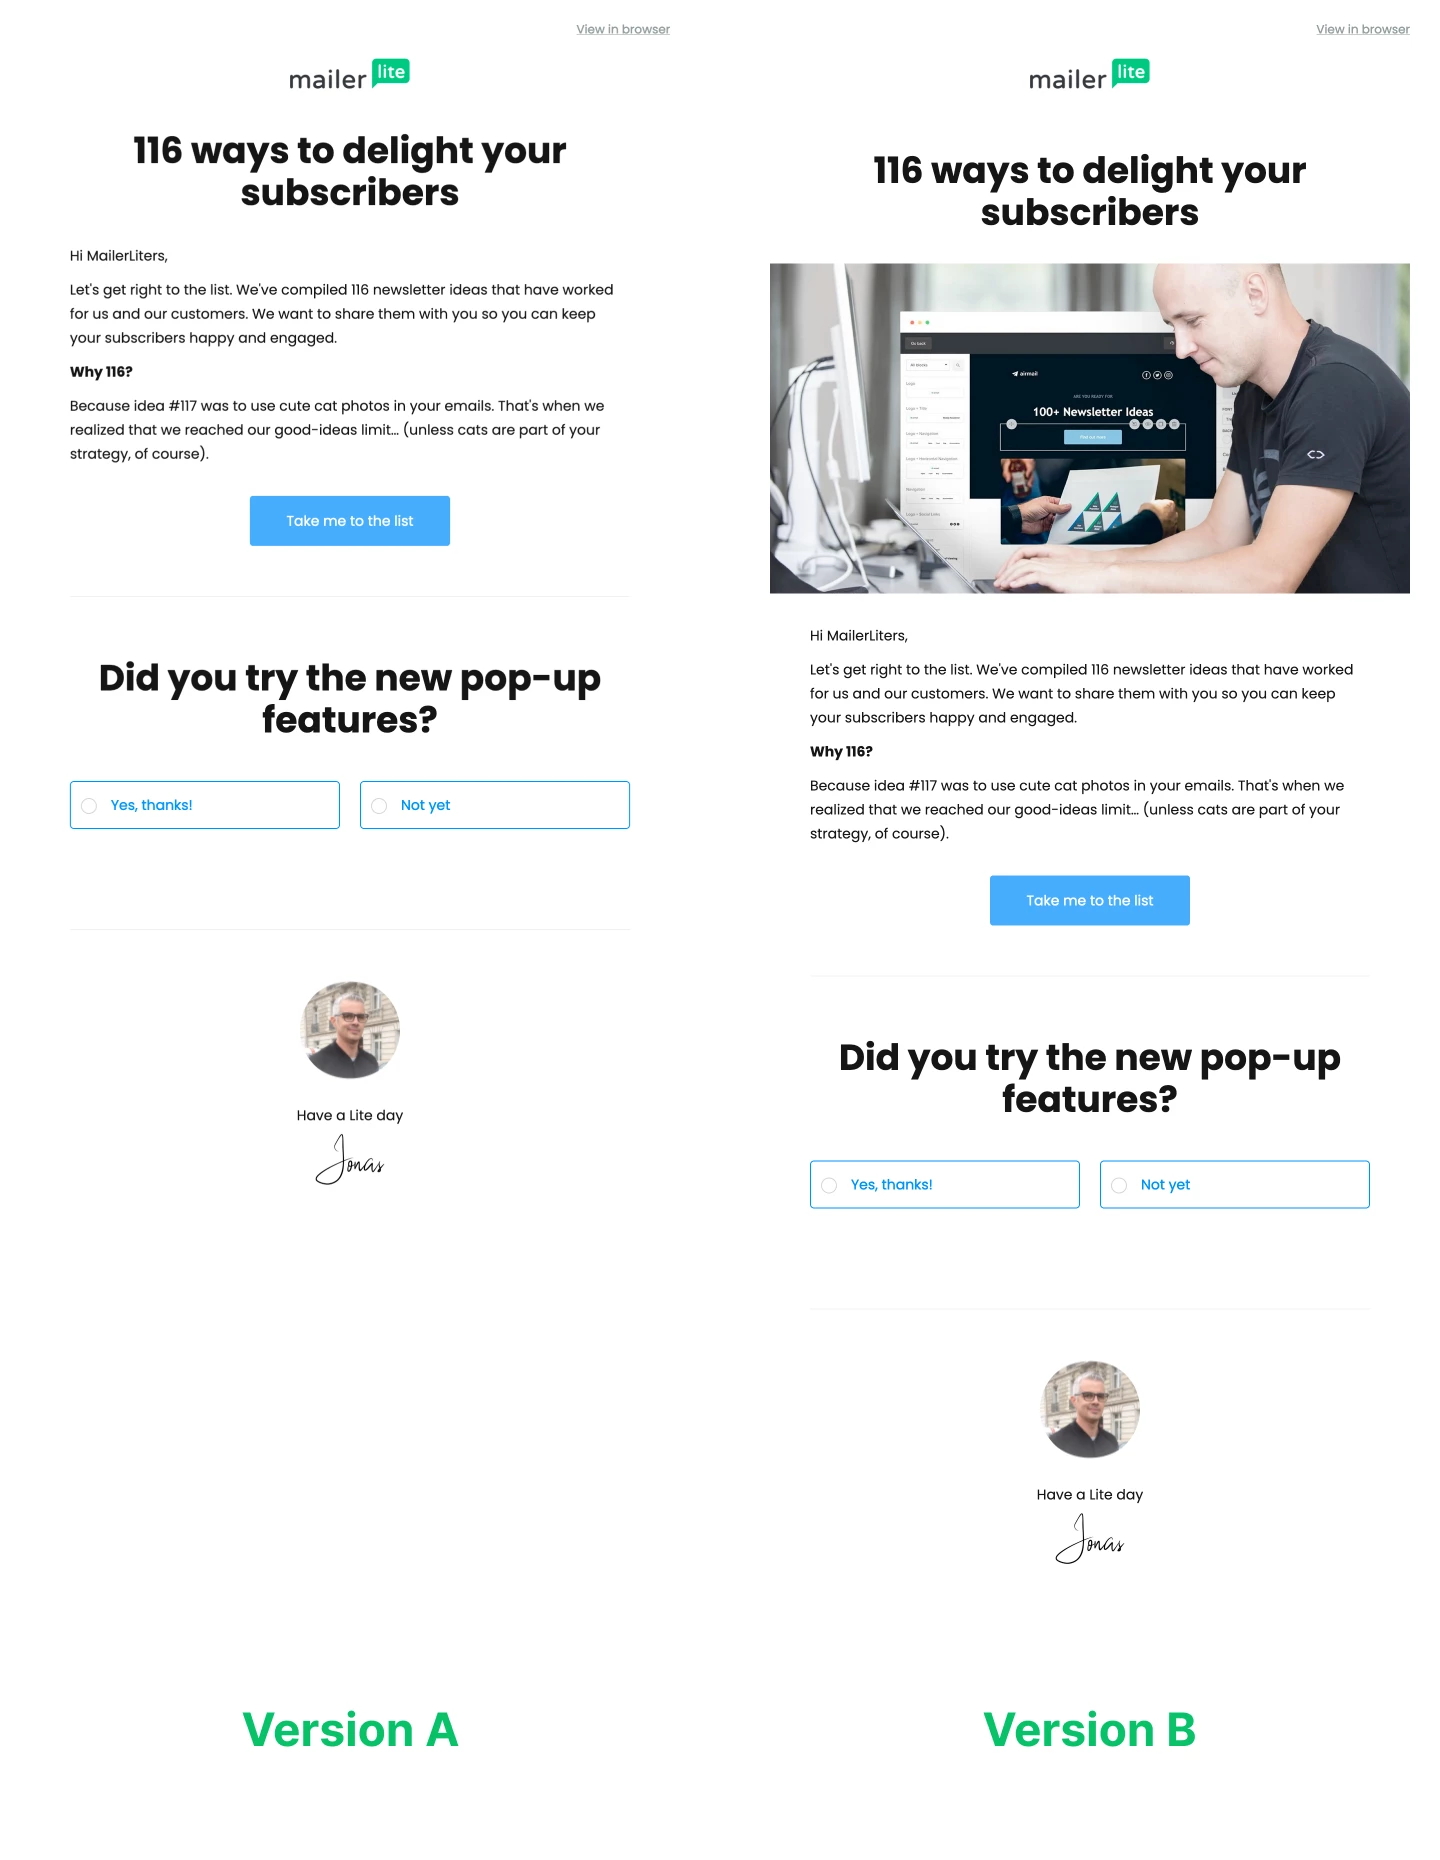 Image of 2 versions of a newsletter, one with a photo another without